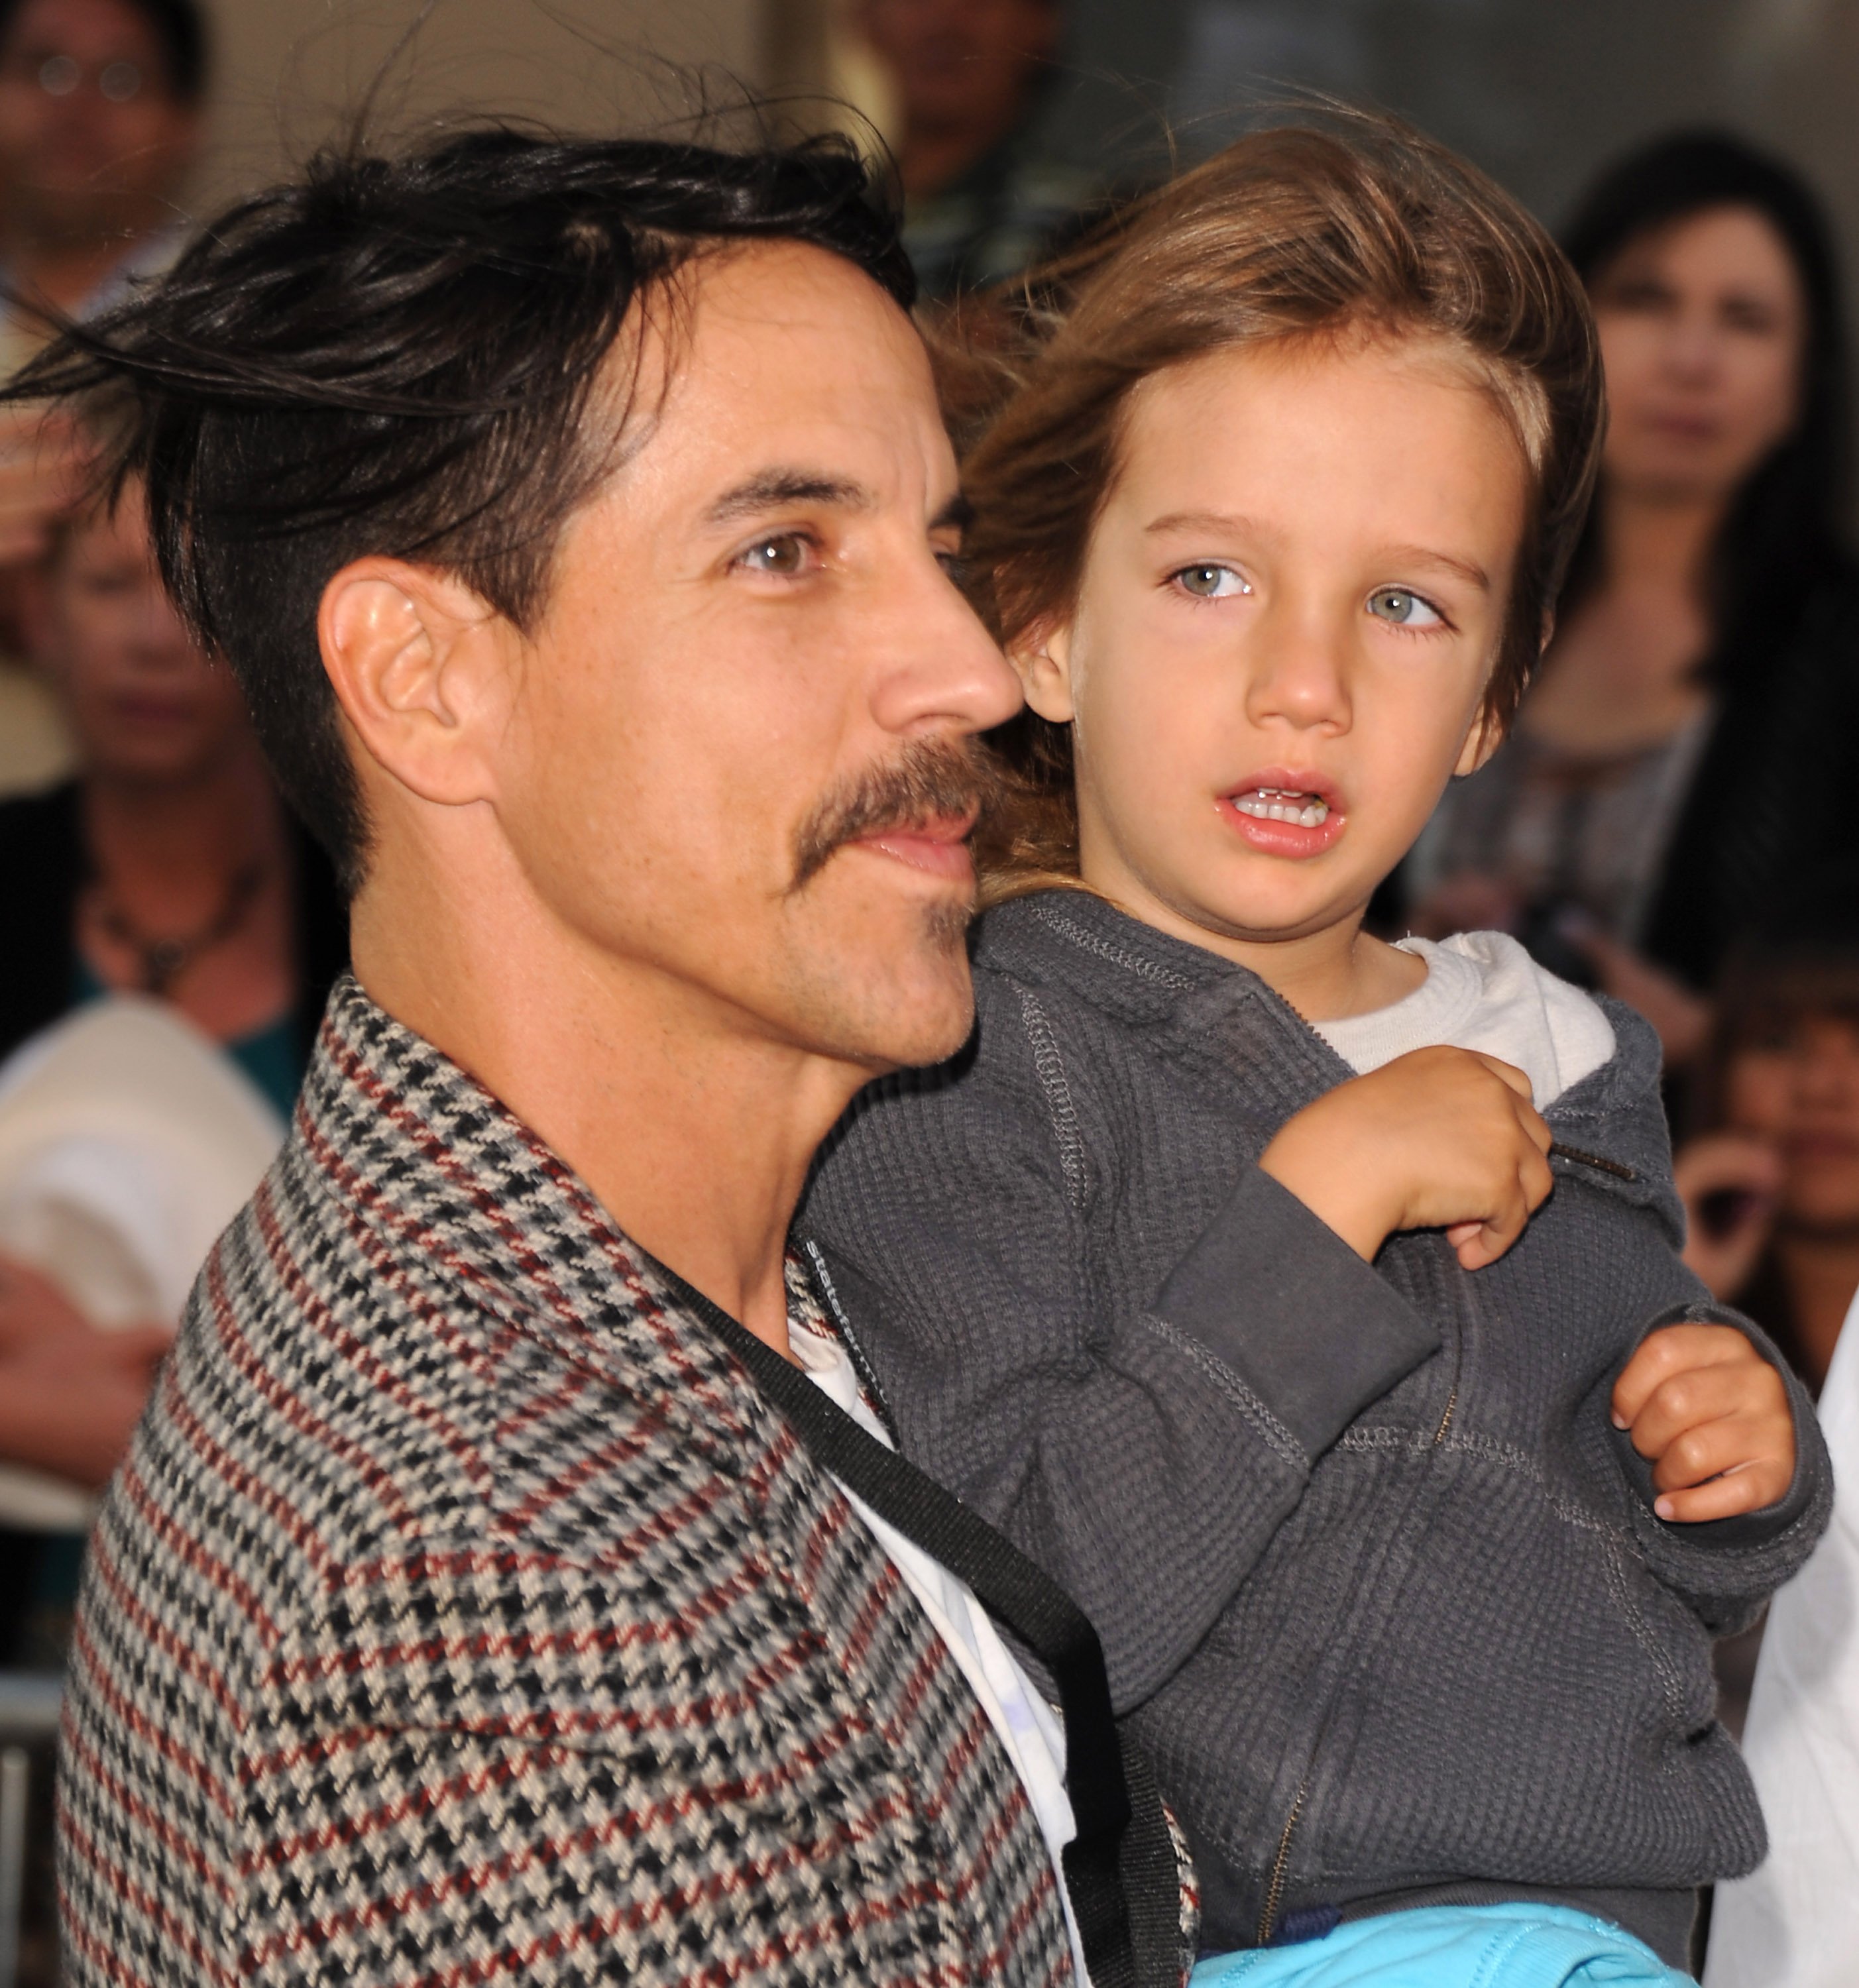 Everly Bear Kiedis and Anthony Kiedis at the Premiere of Walt Disney Pictures "Cars 2" at the El Capitan Theatre on June 18, 2011 in Hollywood, California. | Source: Getty Images